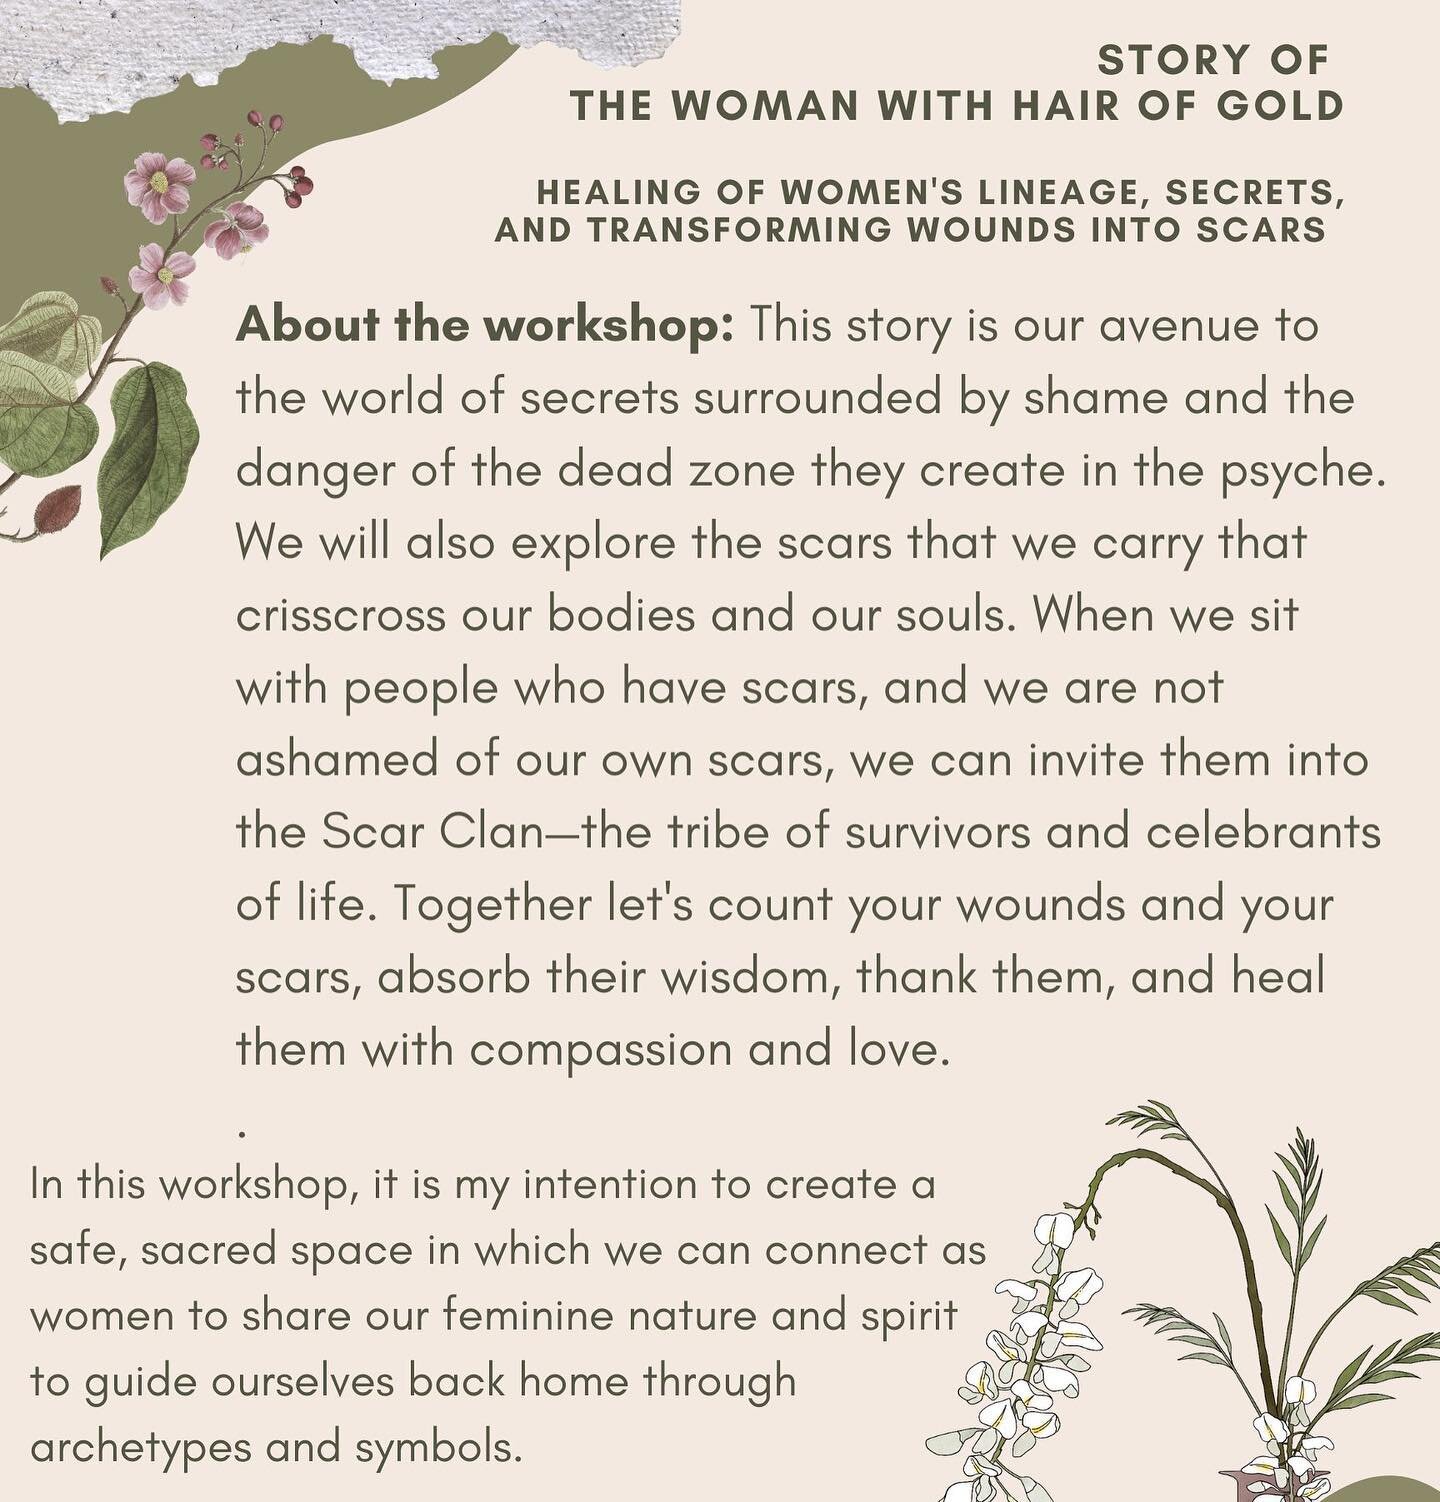 Next week online session is about secrets, transforming wounds into scars and healing of women&rsquo;s lineage. 

Join us to nurture your deepest wisdom through stories, journaling and meaningful group sharing. Time to honour the parts of you that wa